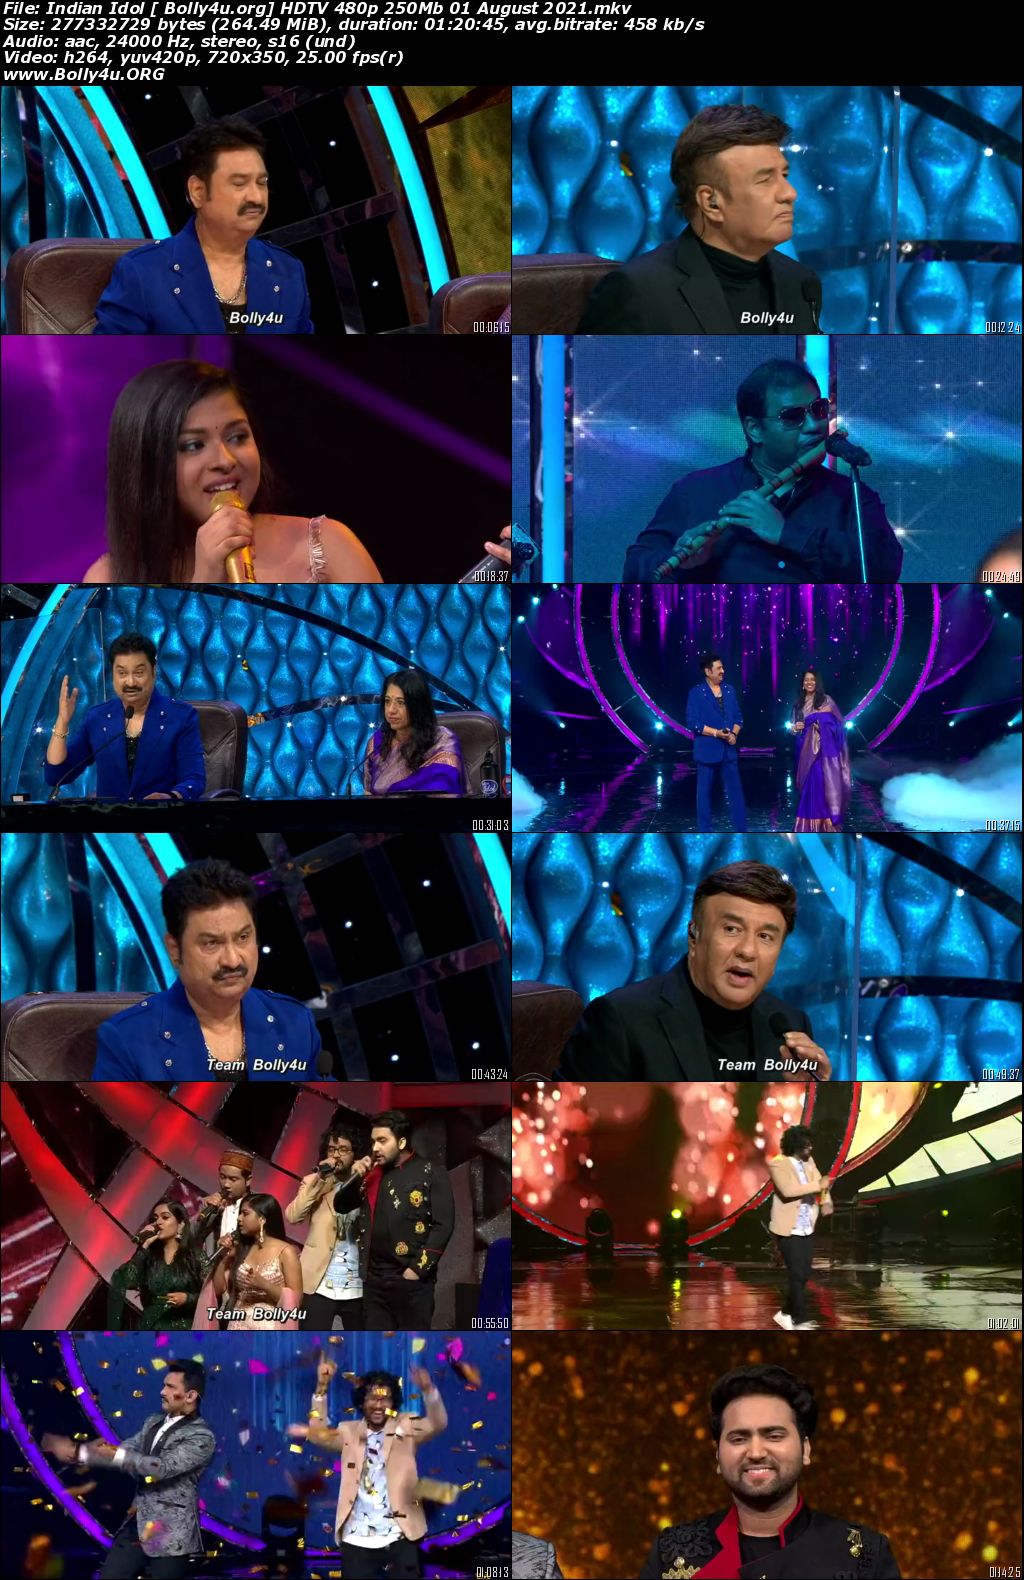 Indian Idol HDTV 480p 250Mb 01 August 2021 Download